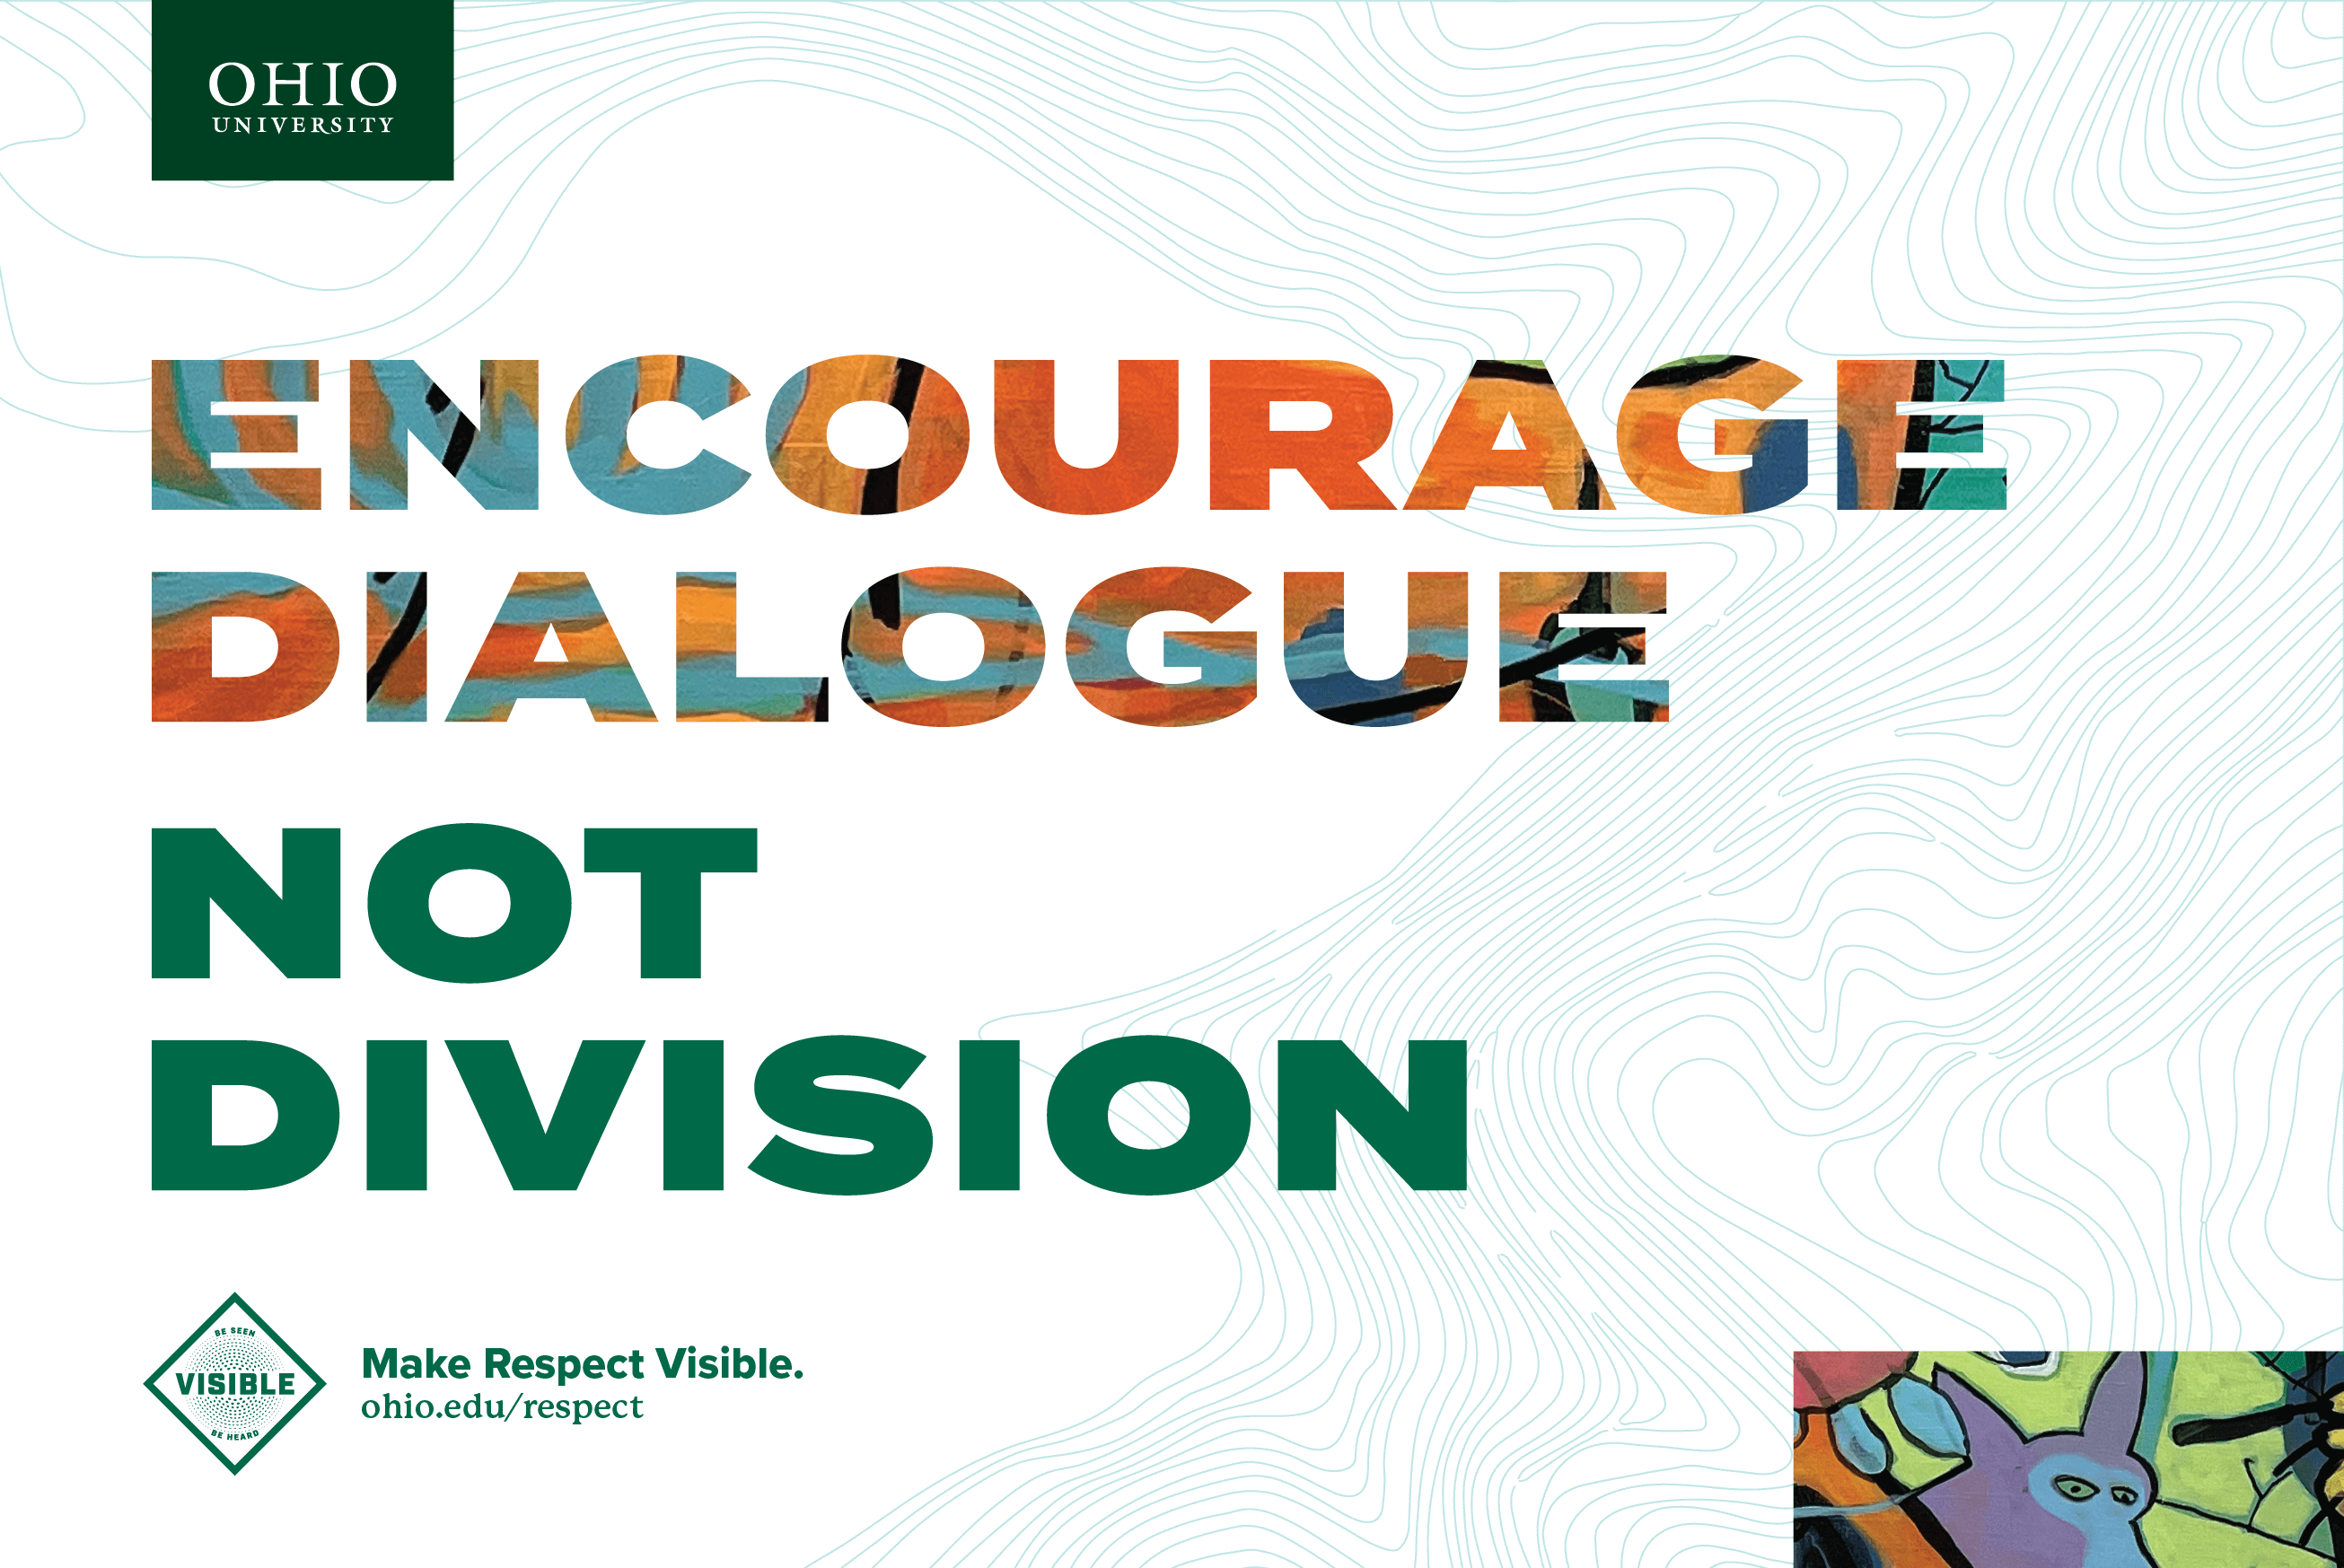 Image of the Encourage Dialogue Make Respect Visible poster